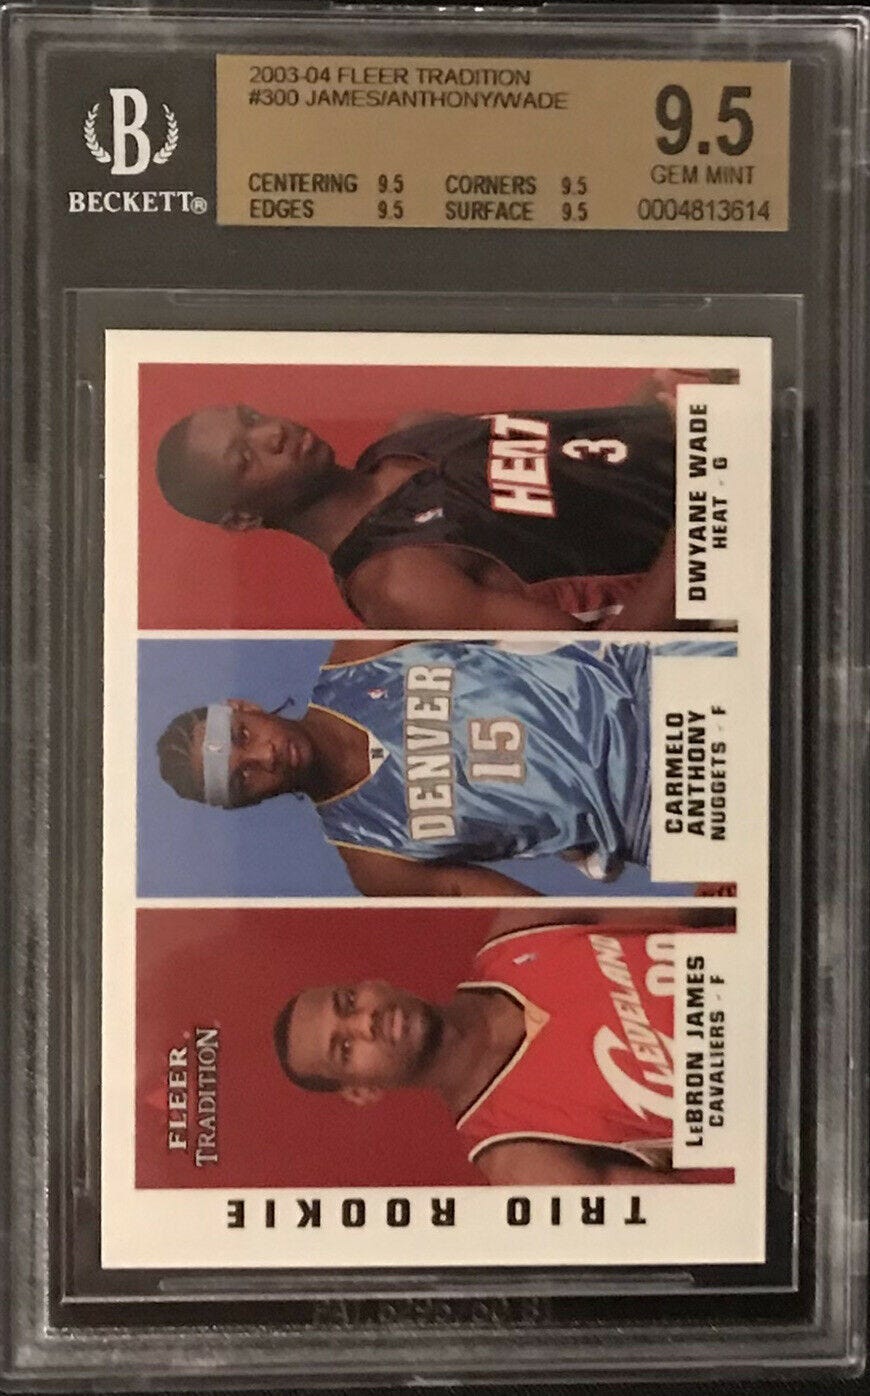 Image 1 - 2003-04 FLEER TRADITION TRIO ROOKIE JAMES/ANTHONY/WADE RC #300 BGS 9.5 GEM MINT